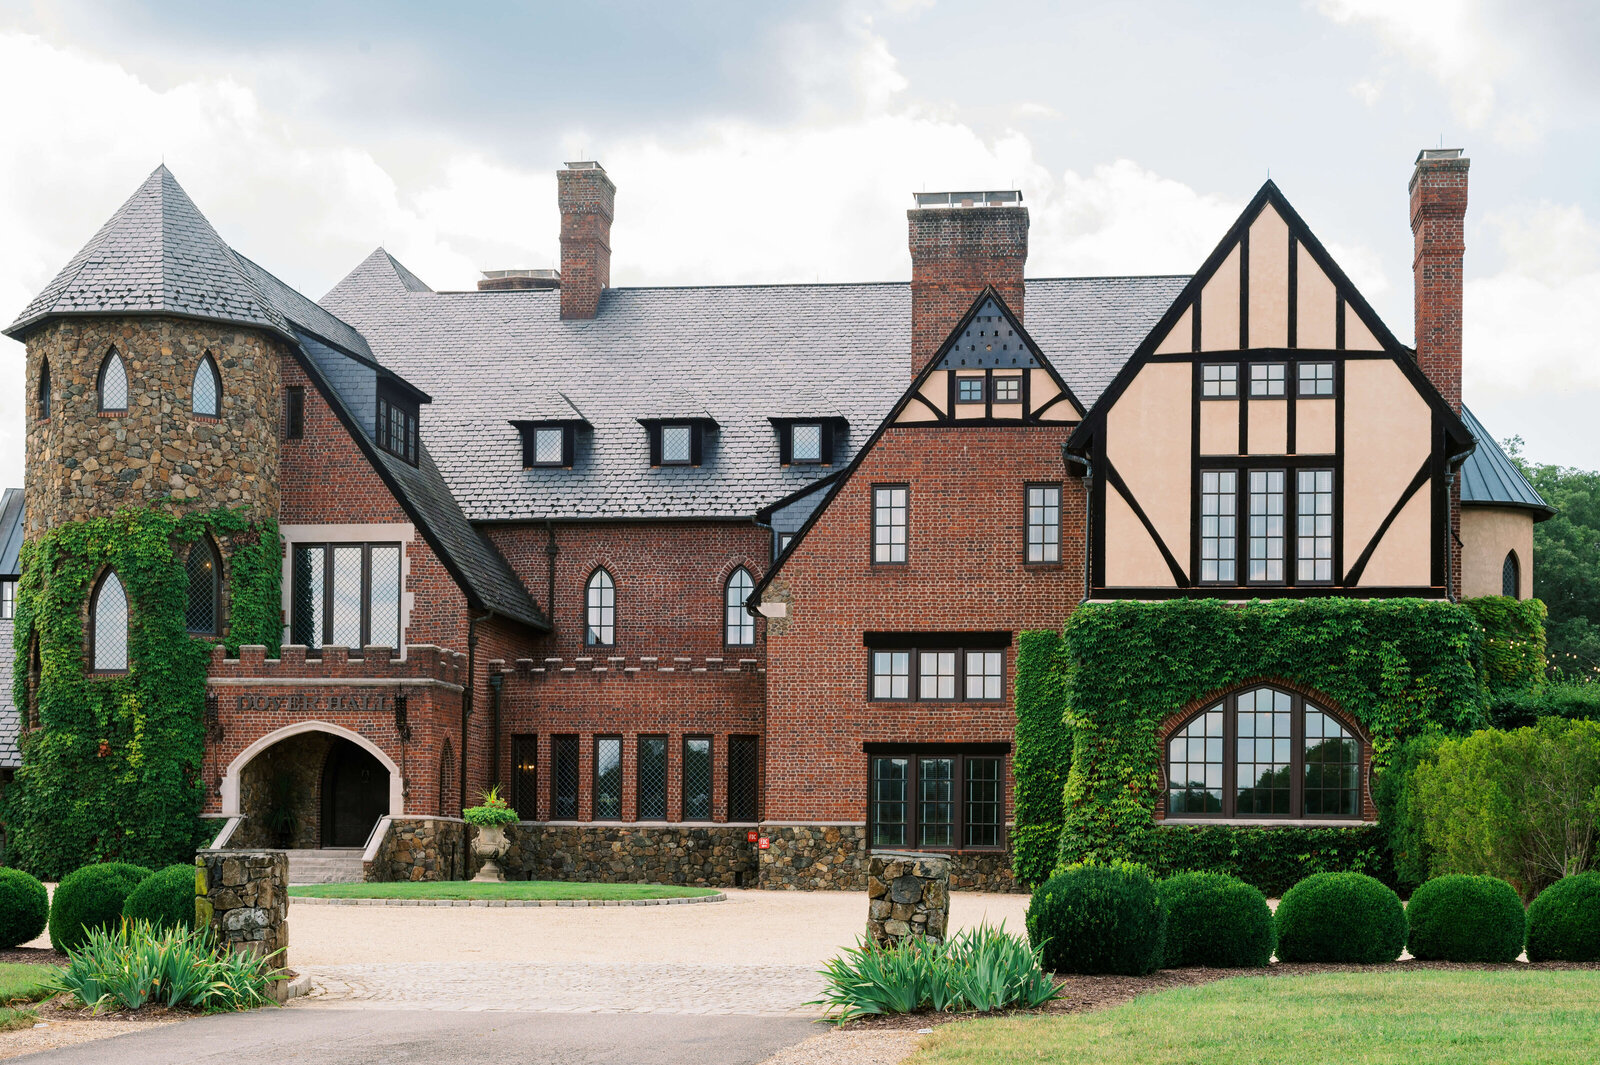 A beautiful brick estate makes for a stunning location for your Virginia wedding